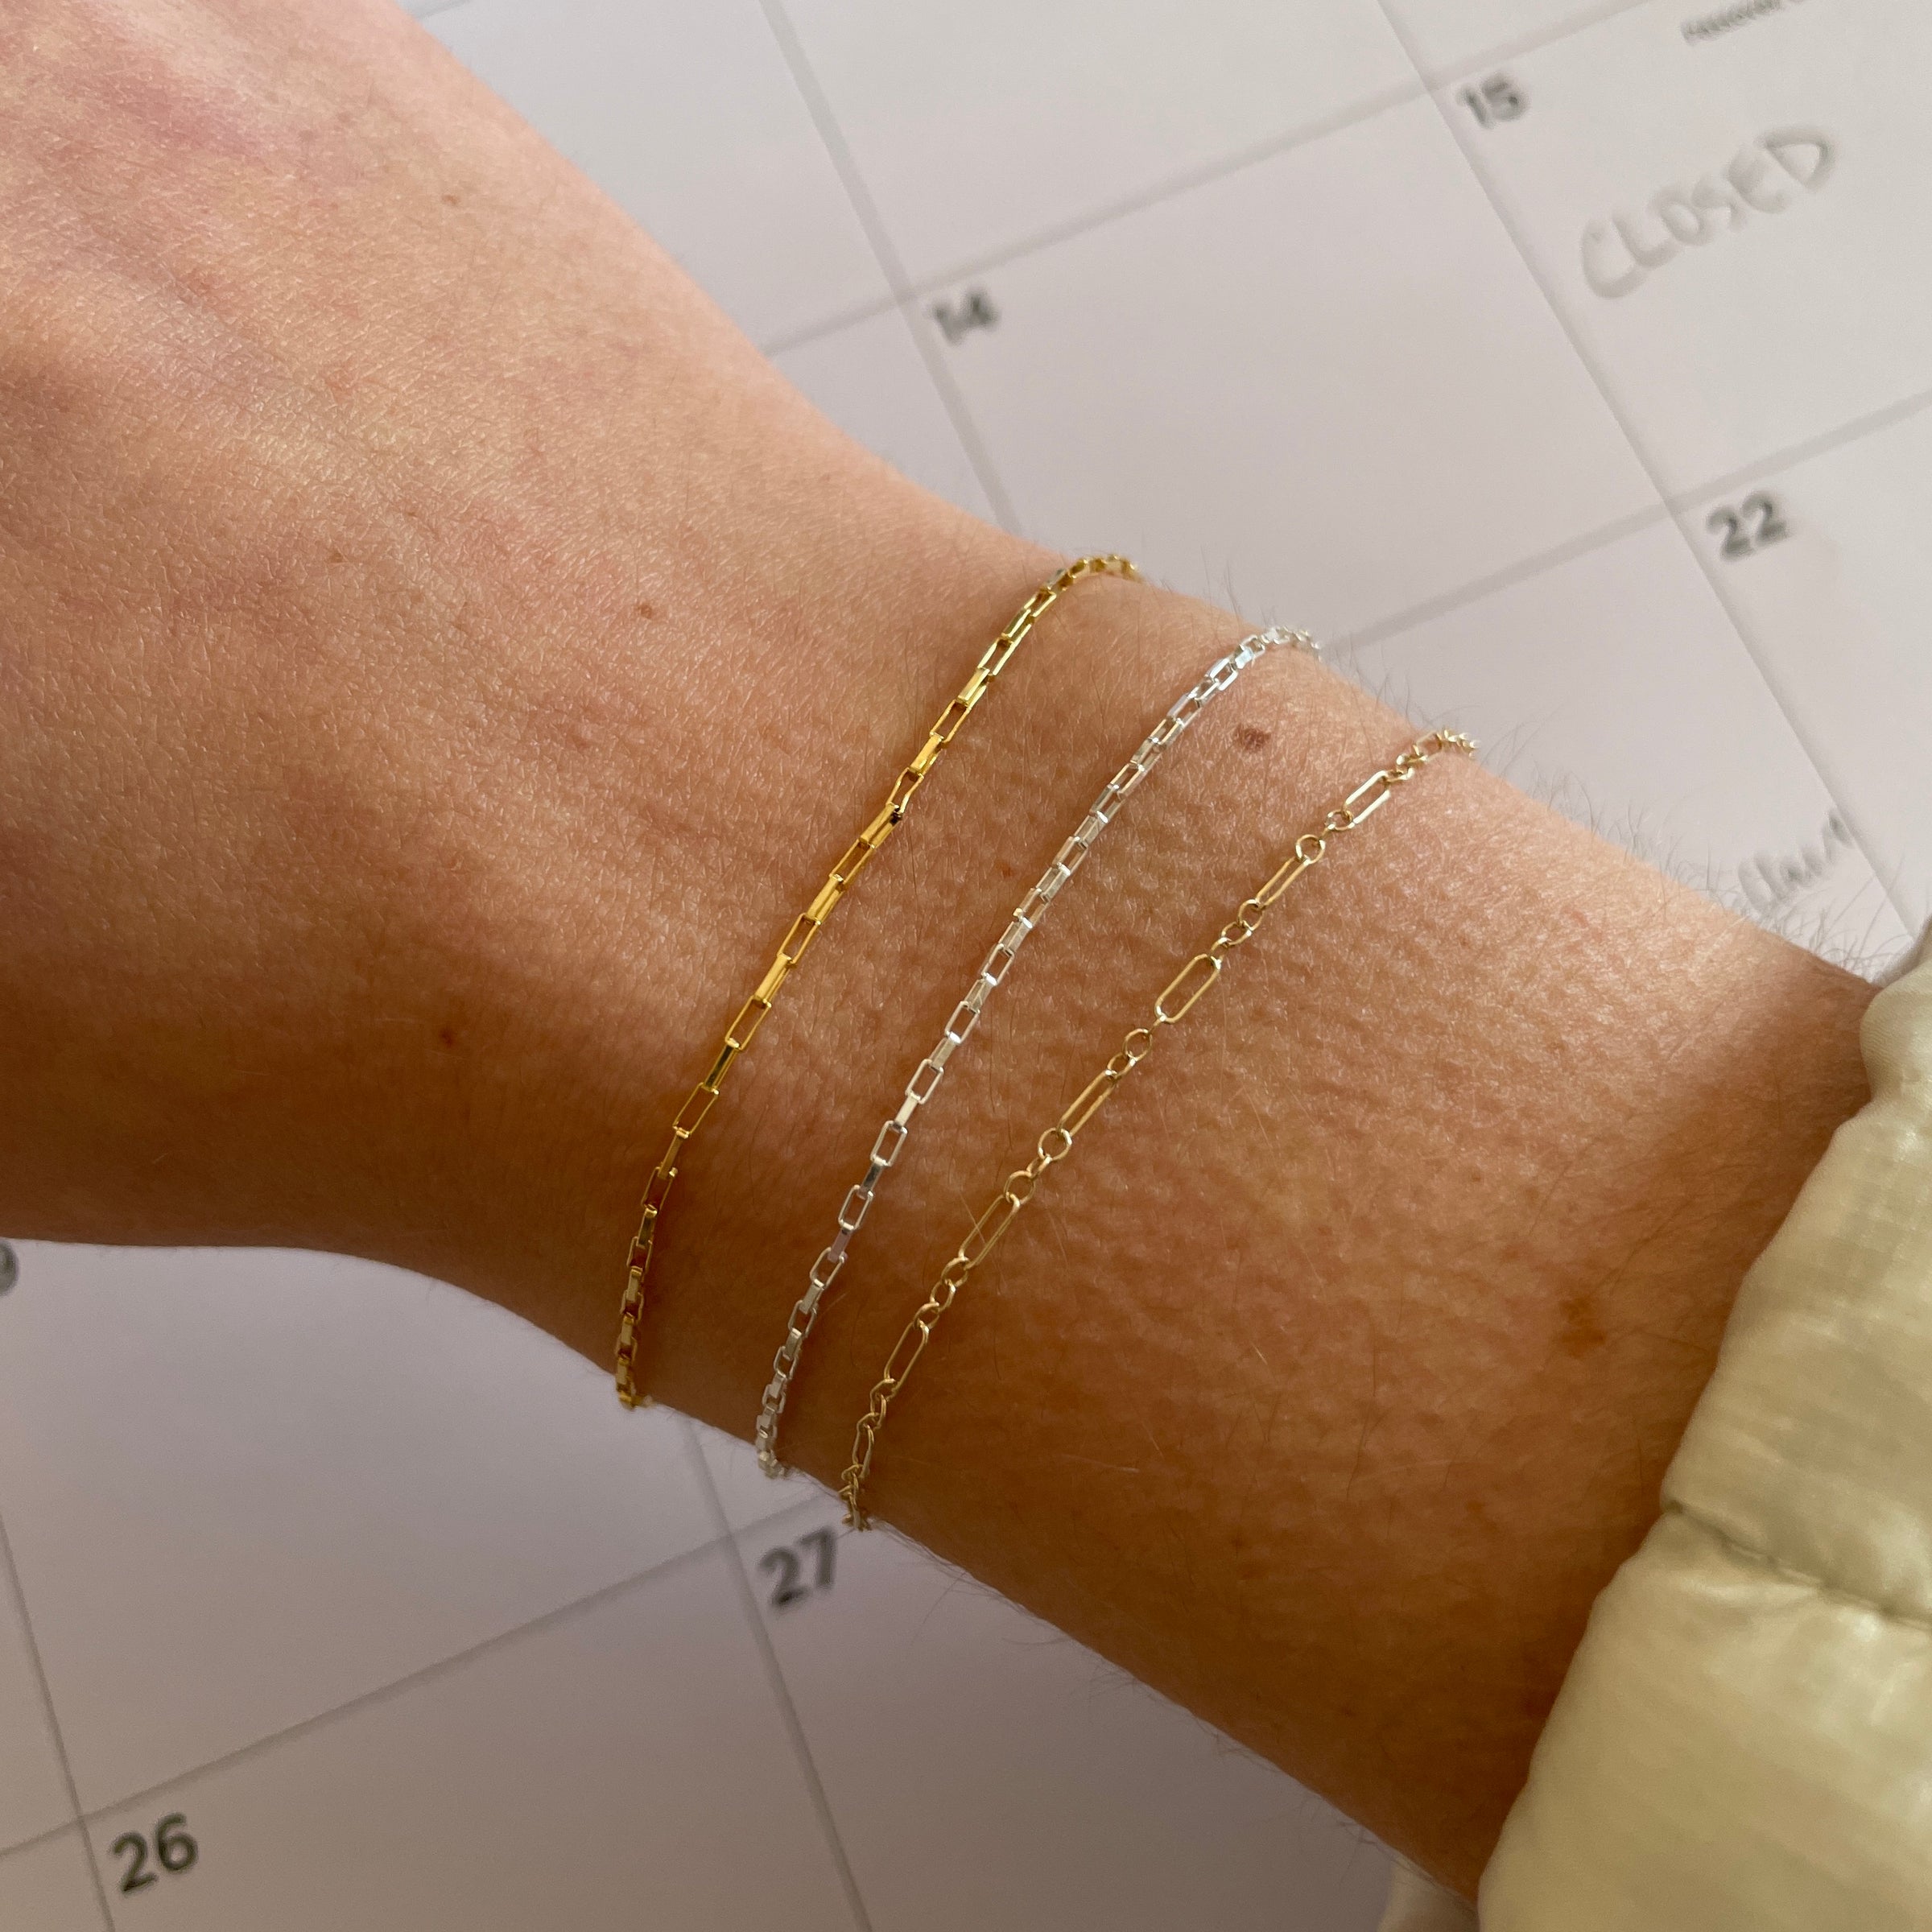 Permanent Bracelet: What To Expect